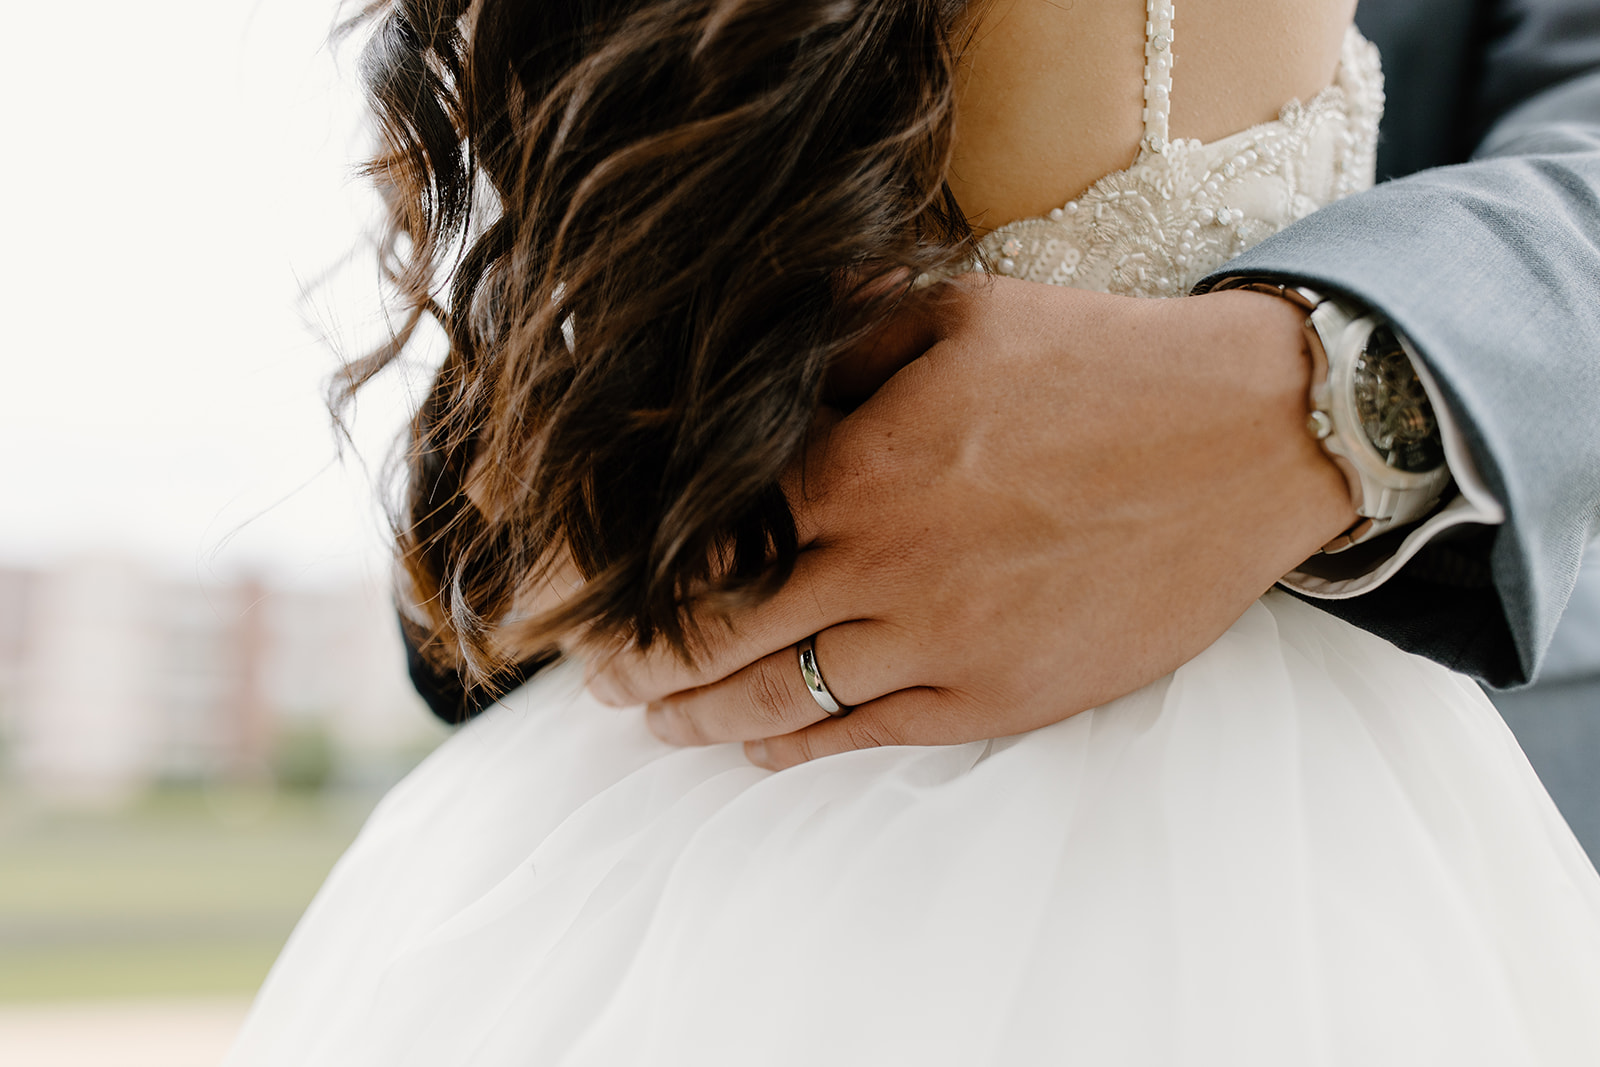 Hands on the waist of a bride